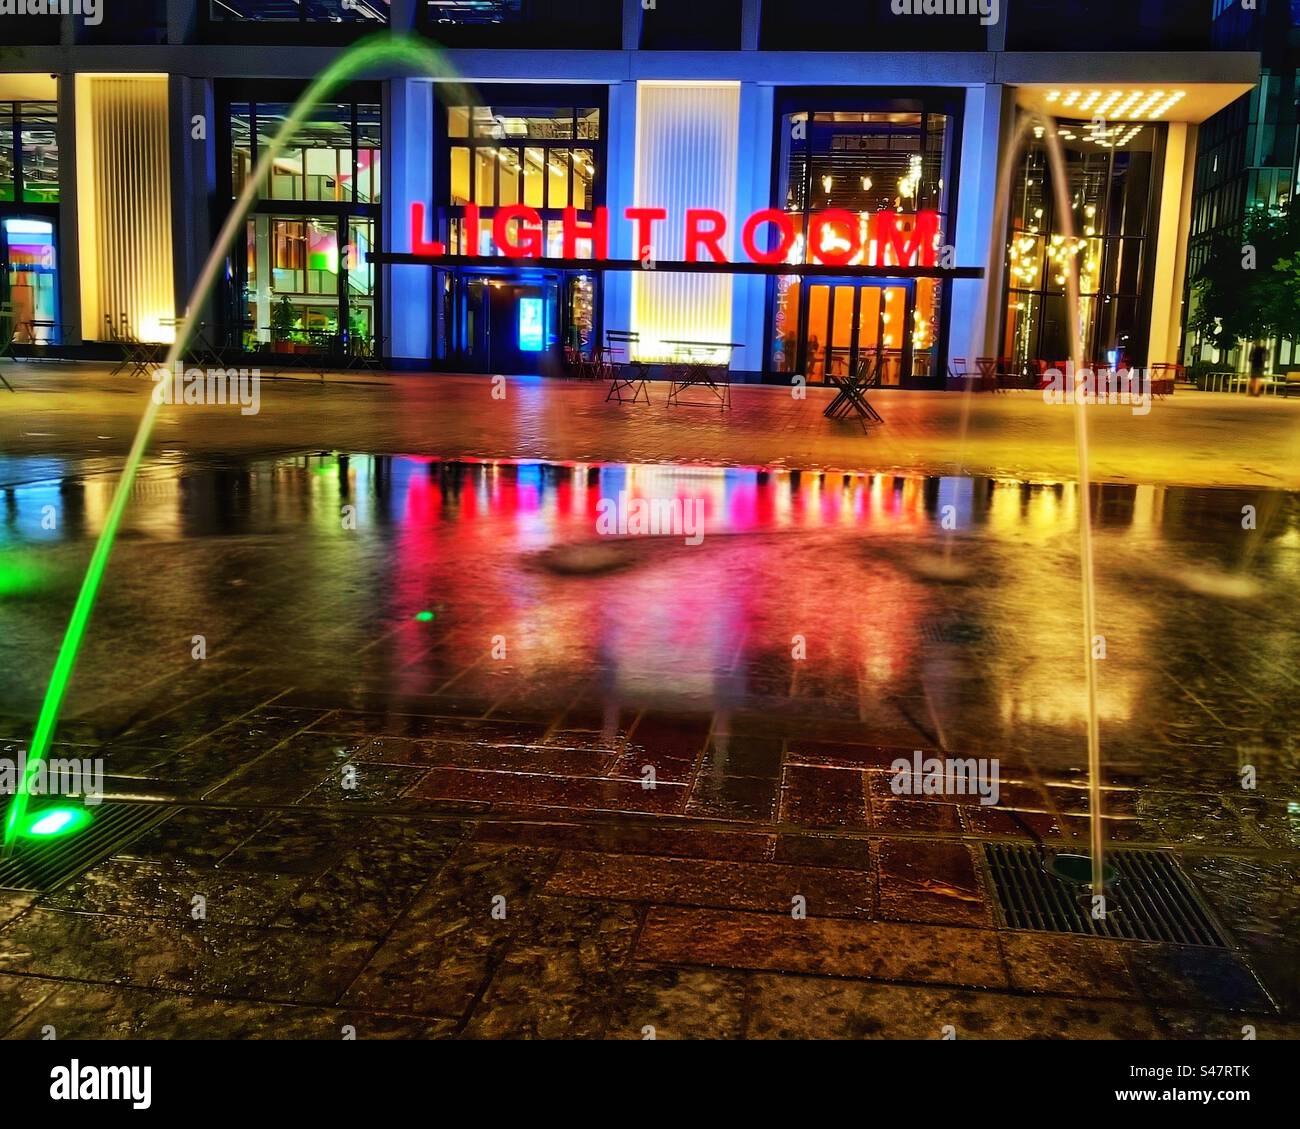 Two jets of water in the public square, Coal Drop Yard in Kings Cross in London illuminated with neon lights at night. Stock Photo